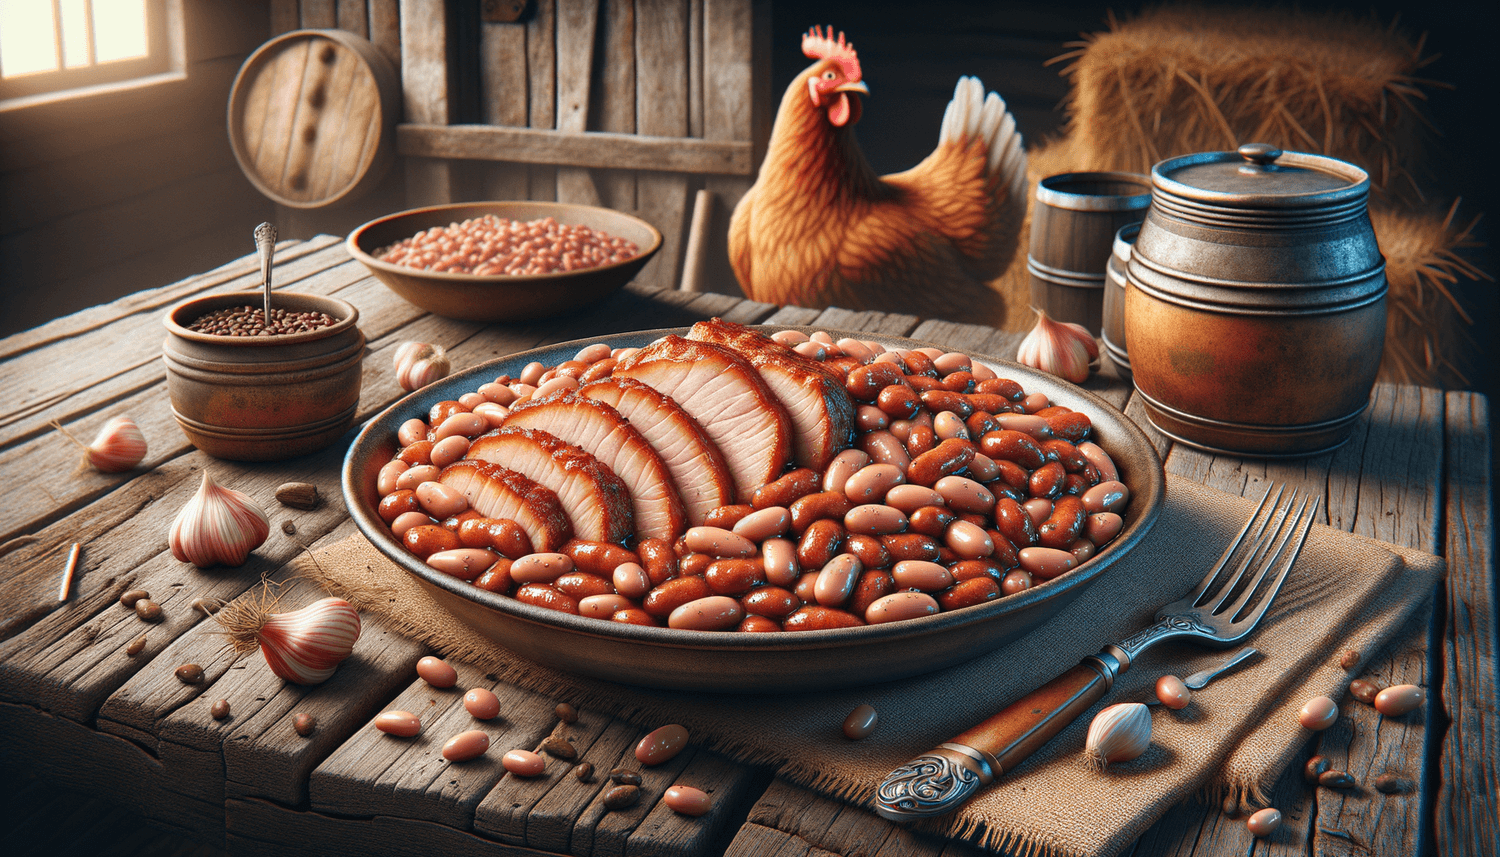 Can Chickens Eat Pork and Beans?